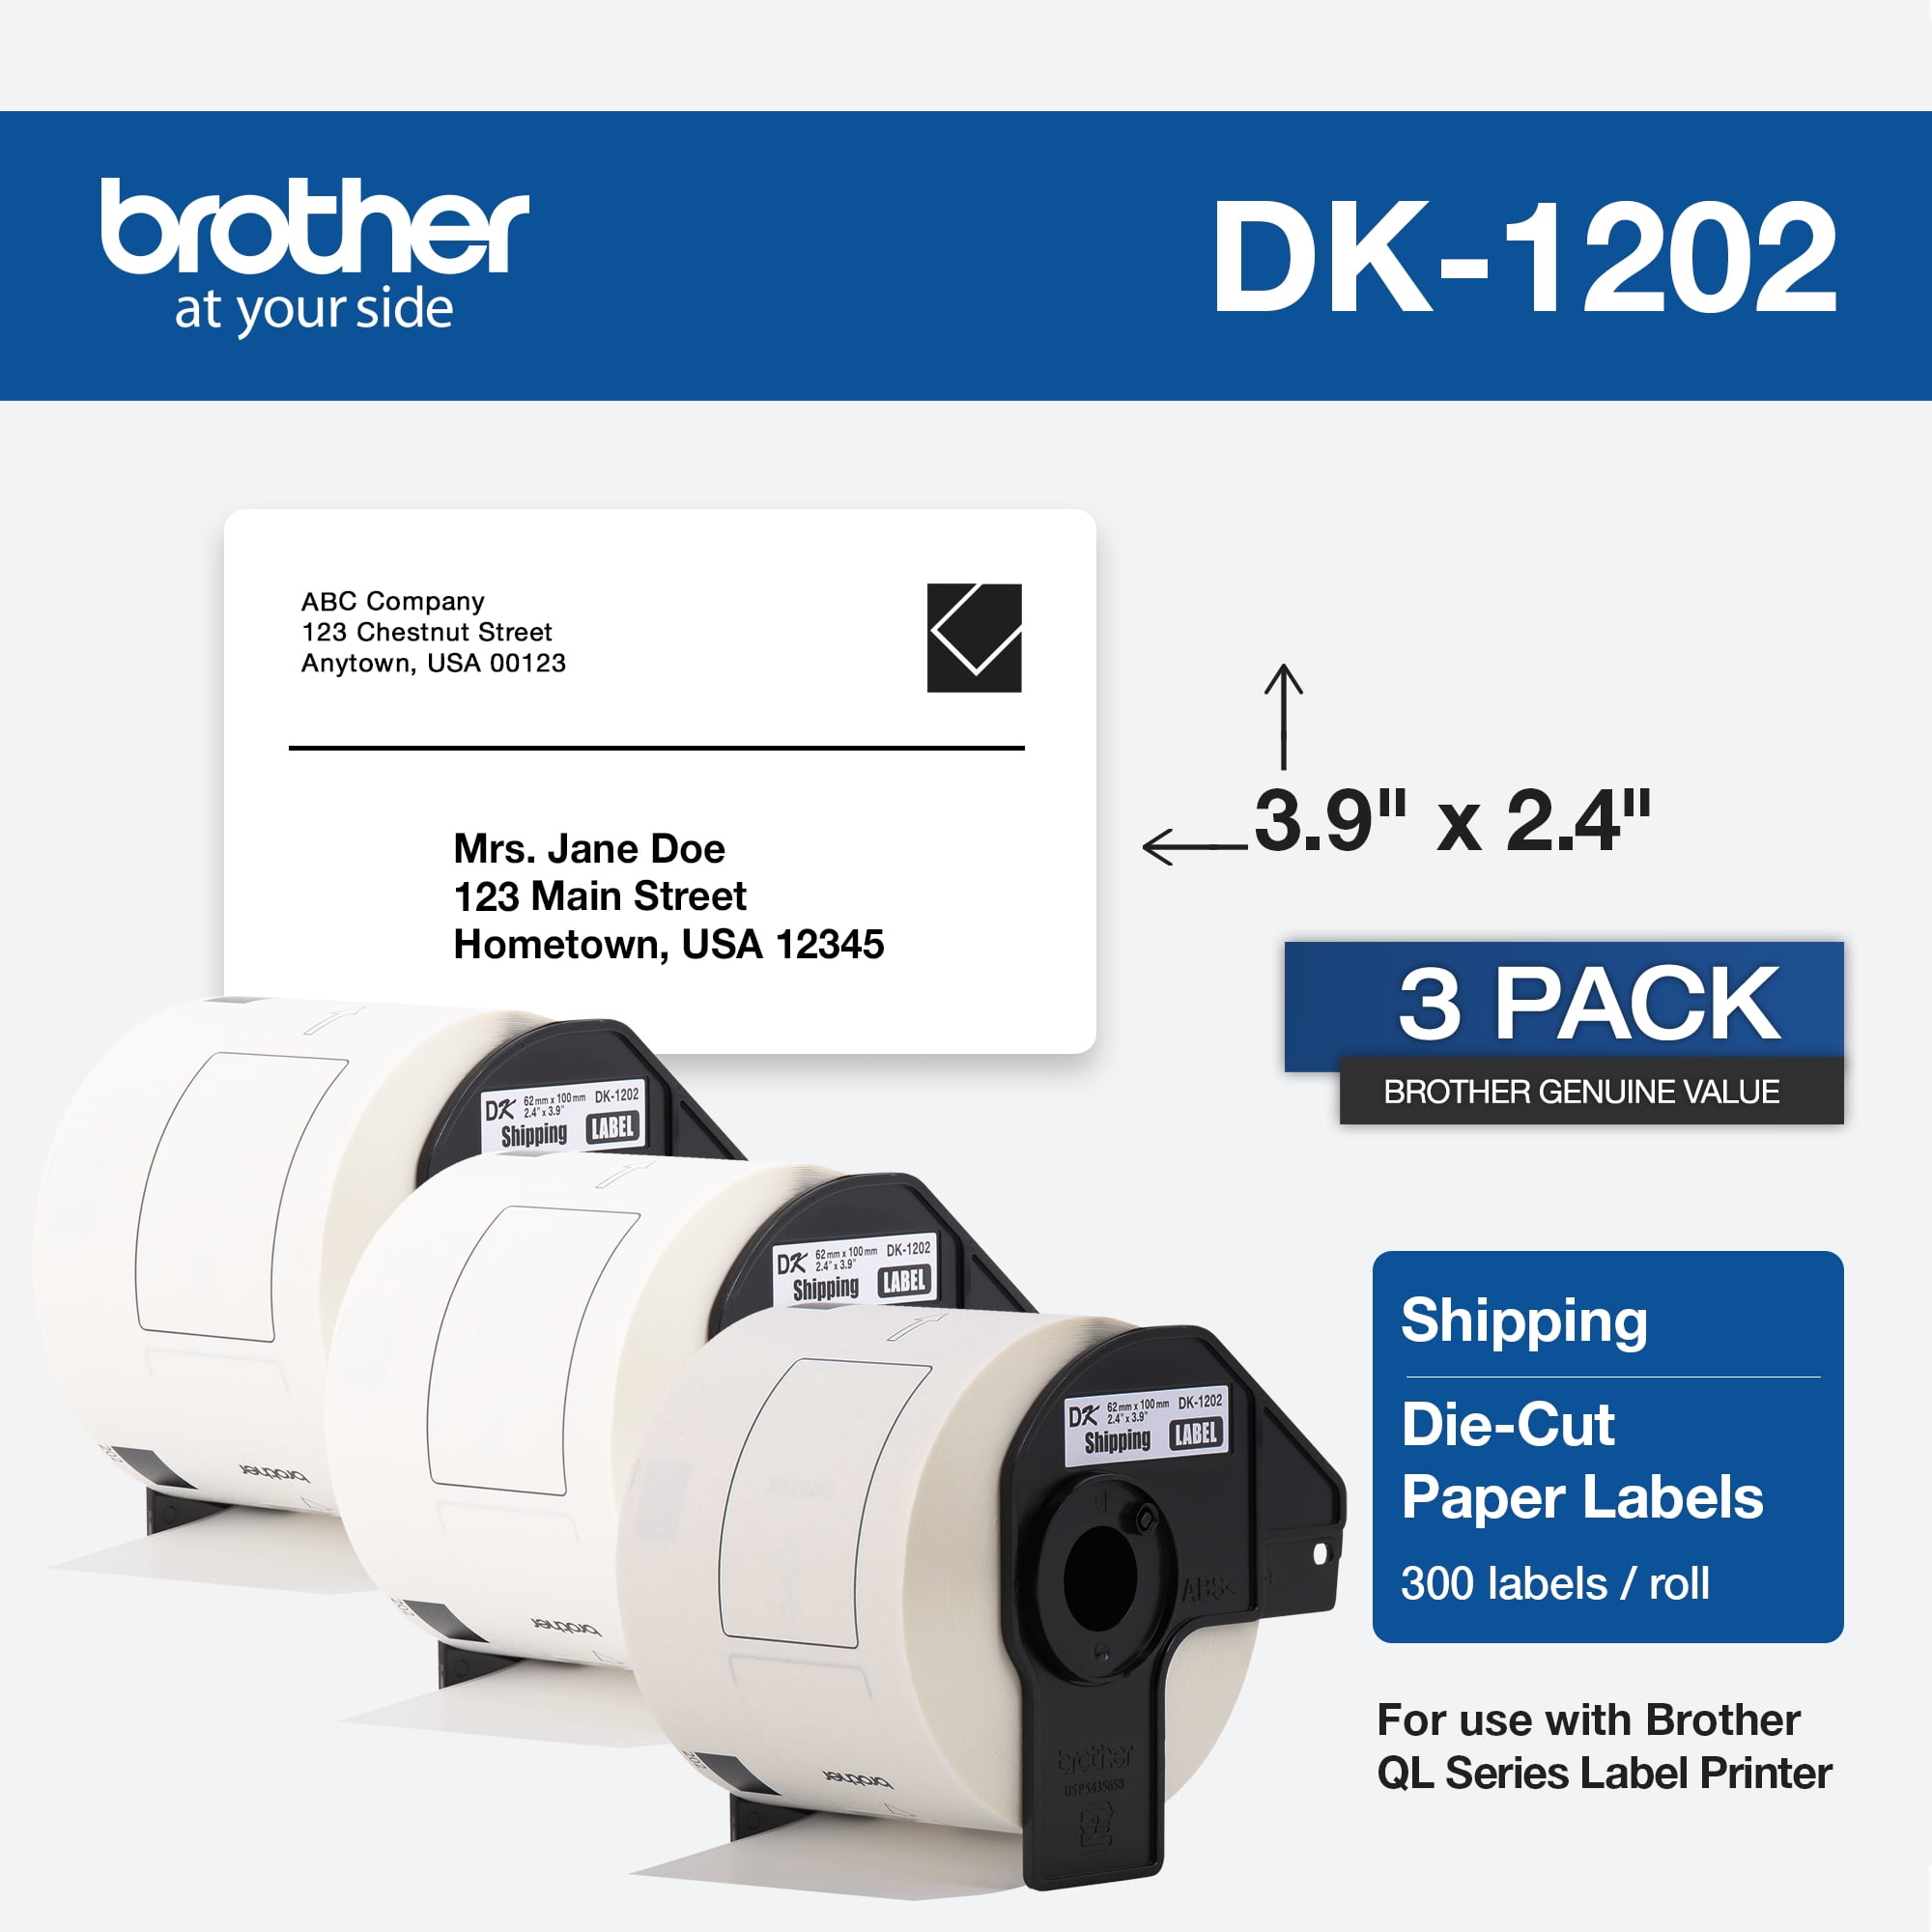 20 4" x 2" Rolls of 600 Non-OEM Fits BROTHER DK-1240 Labels - 